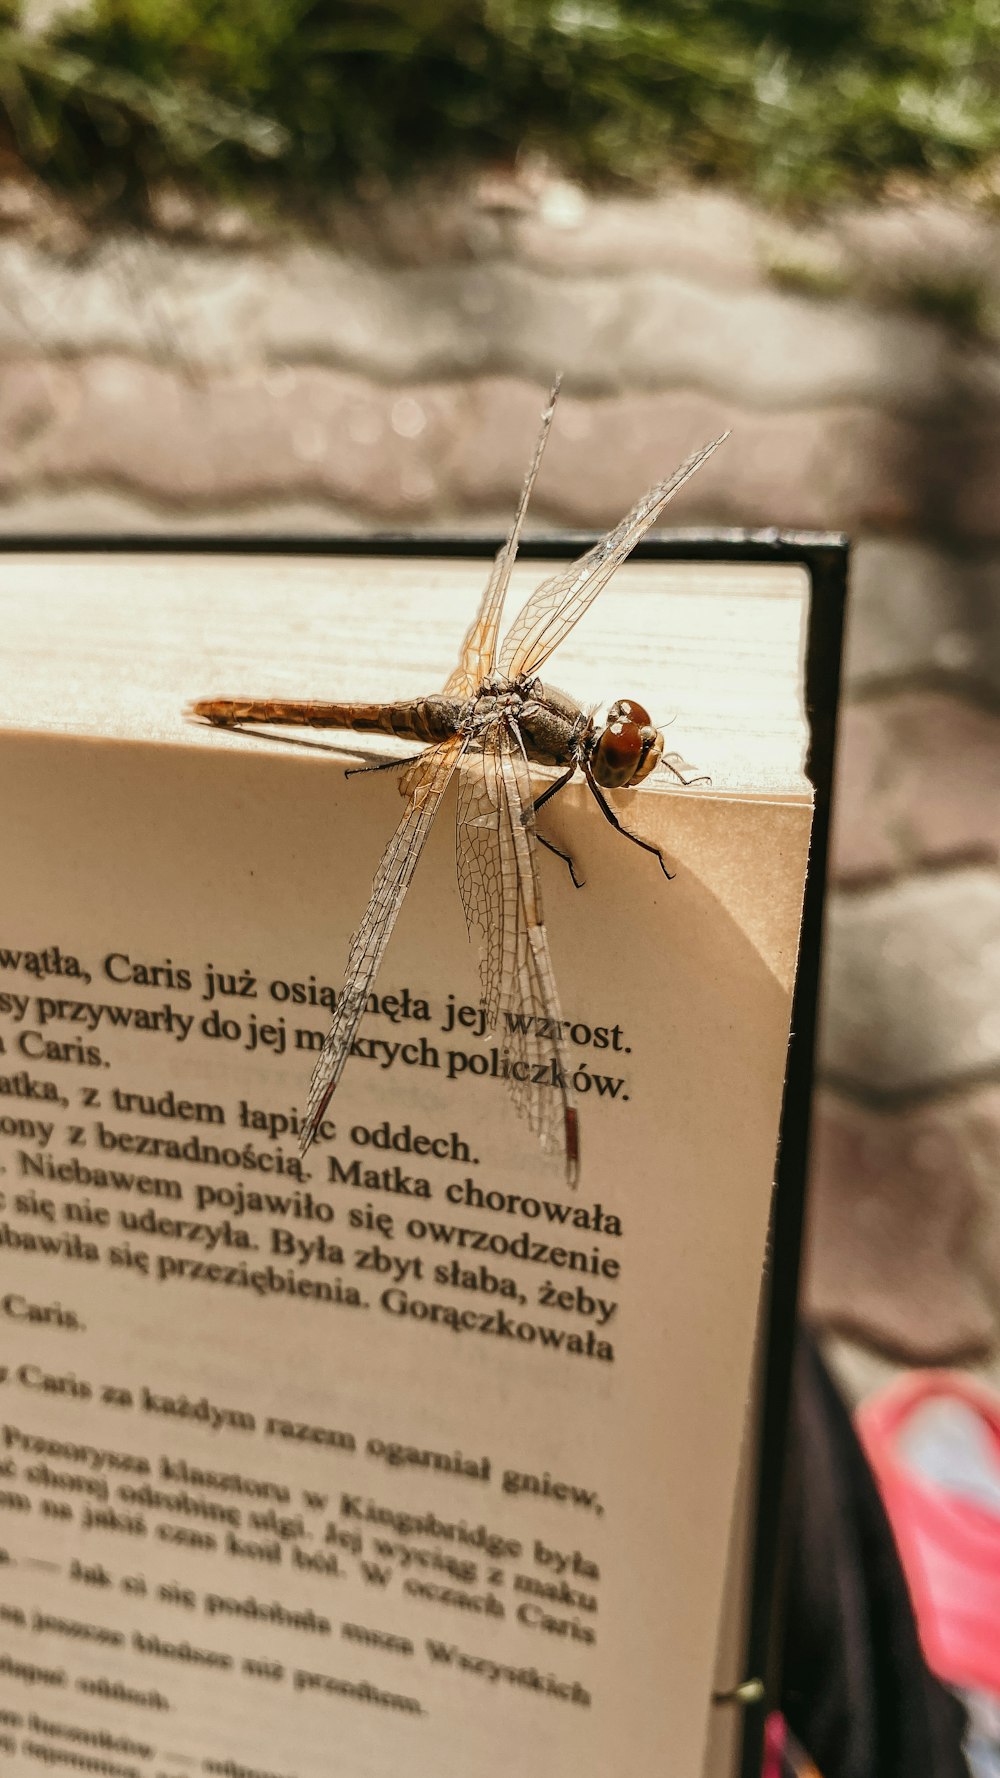 a dragonfly on a book